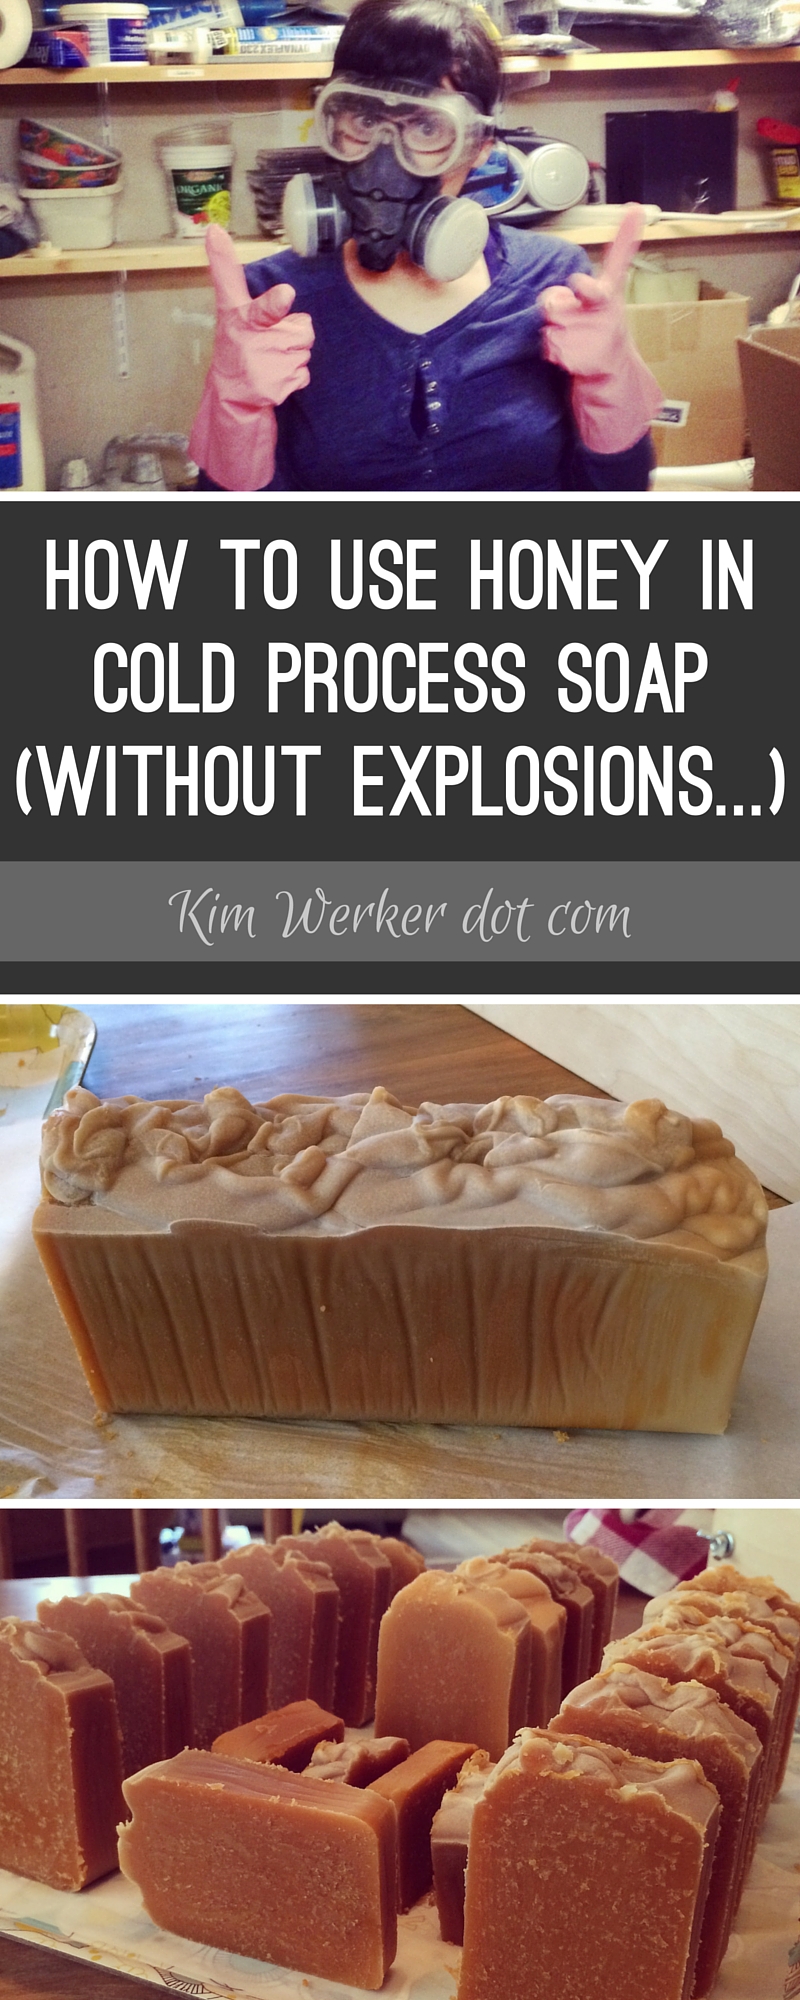 Using Honey in Making Cold-Process Soap